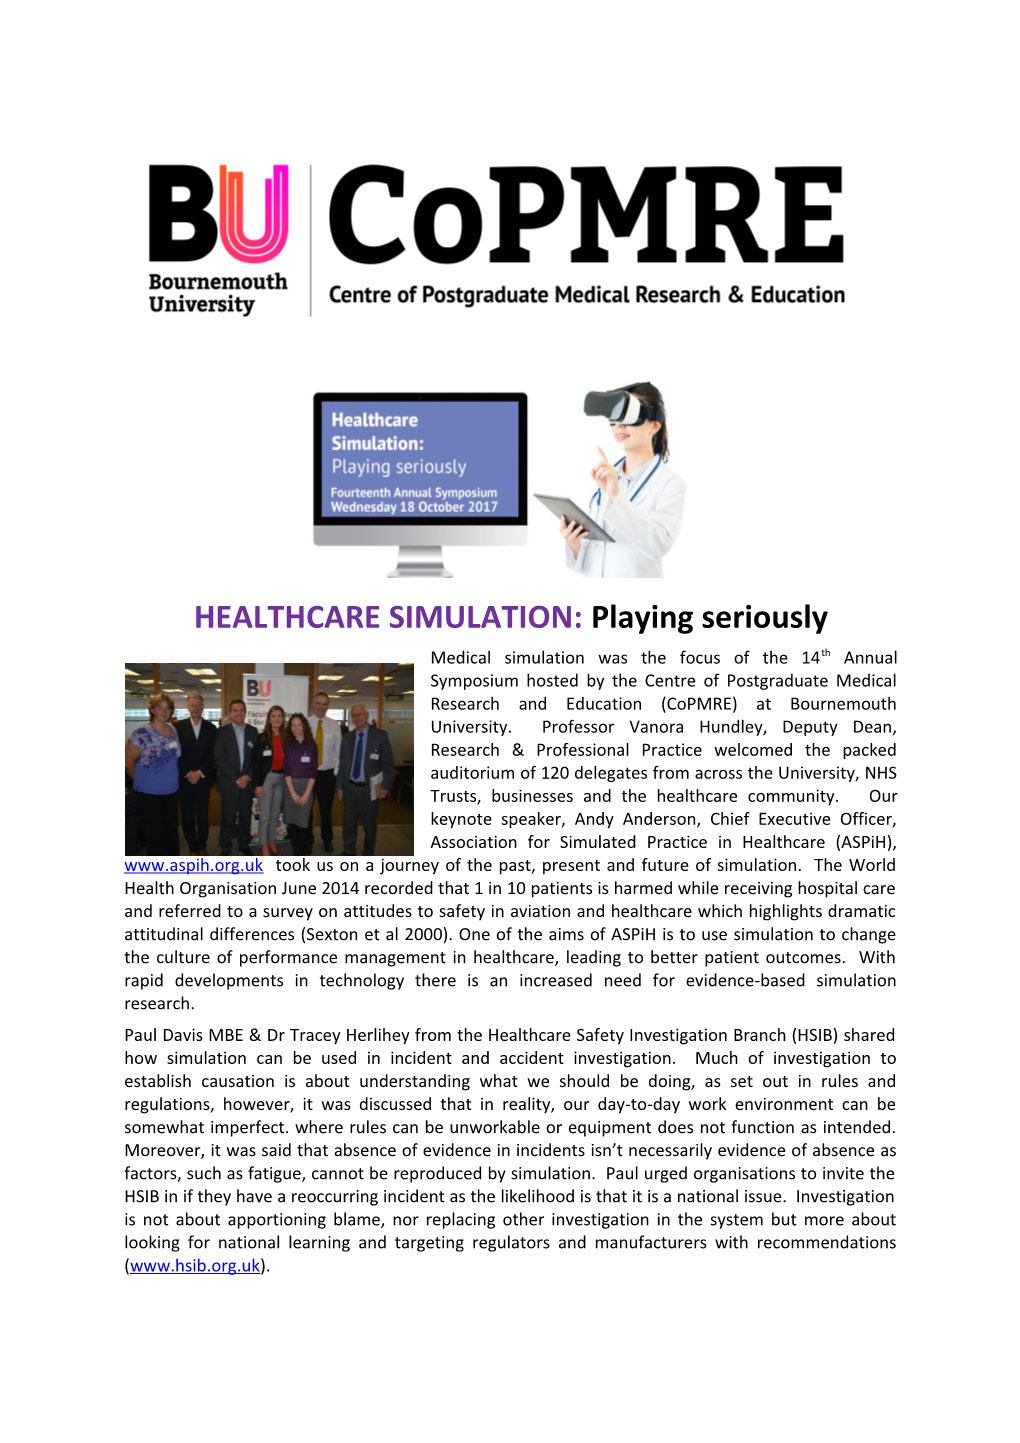 HEALTHCARE SIMULATION: Playing Seriously